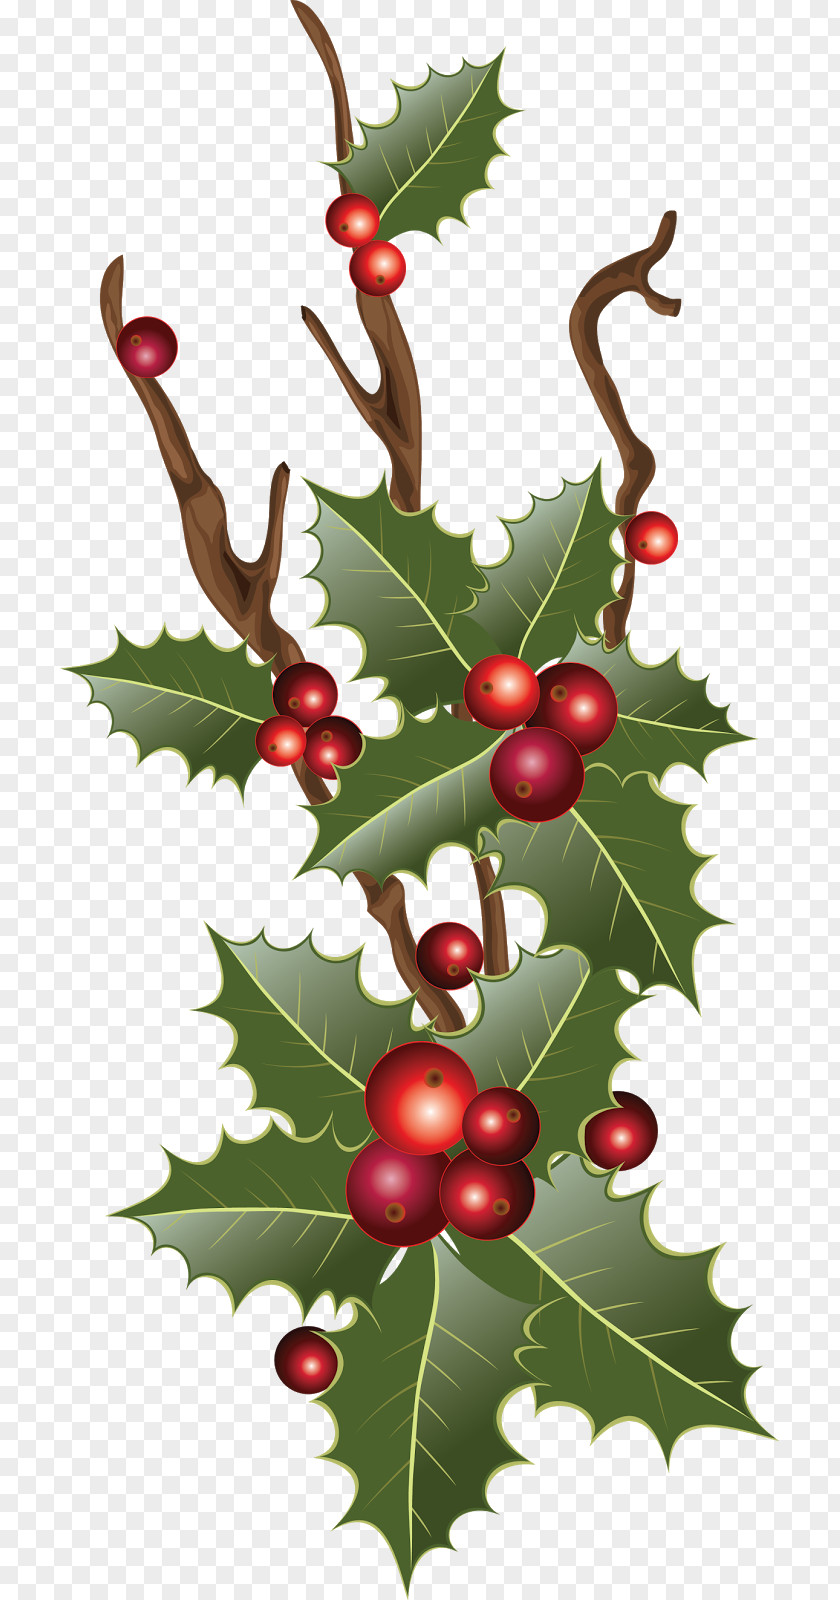 T Garland Christmas Decoration Ornament Tree PNG